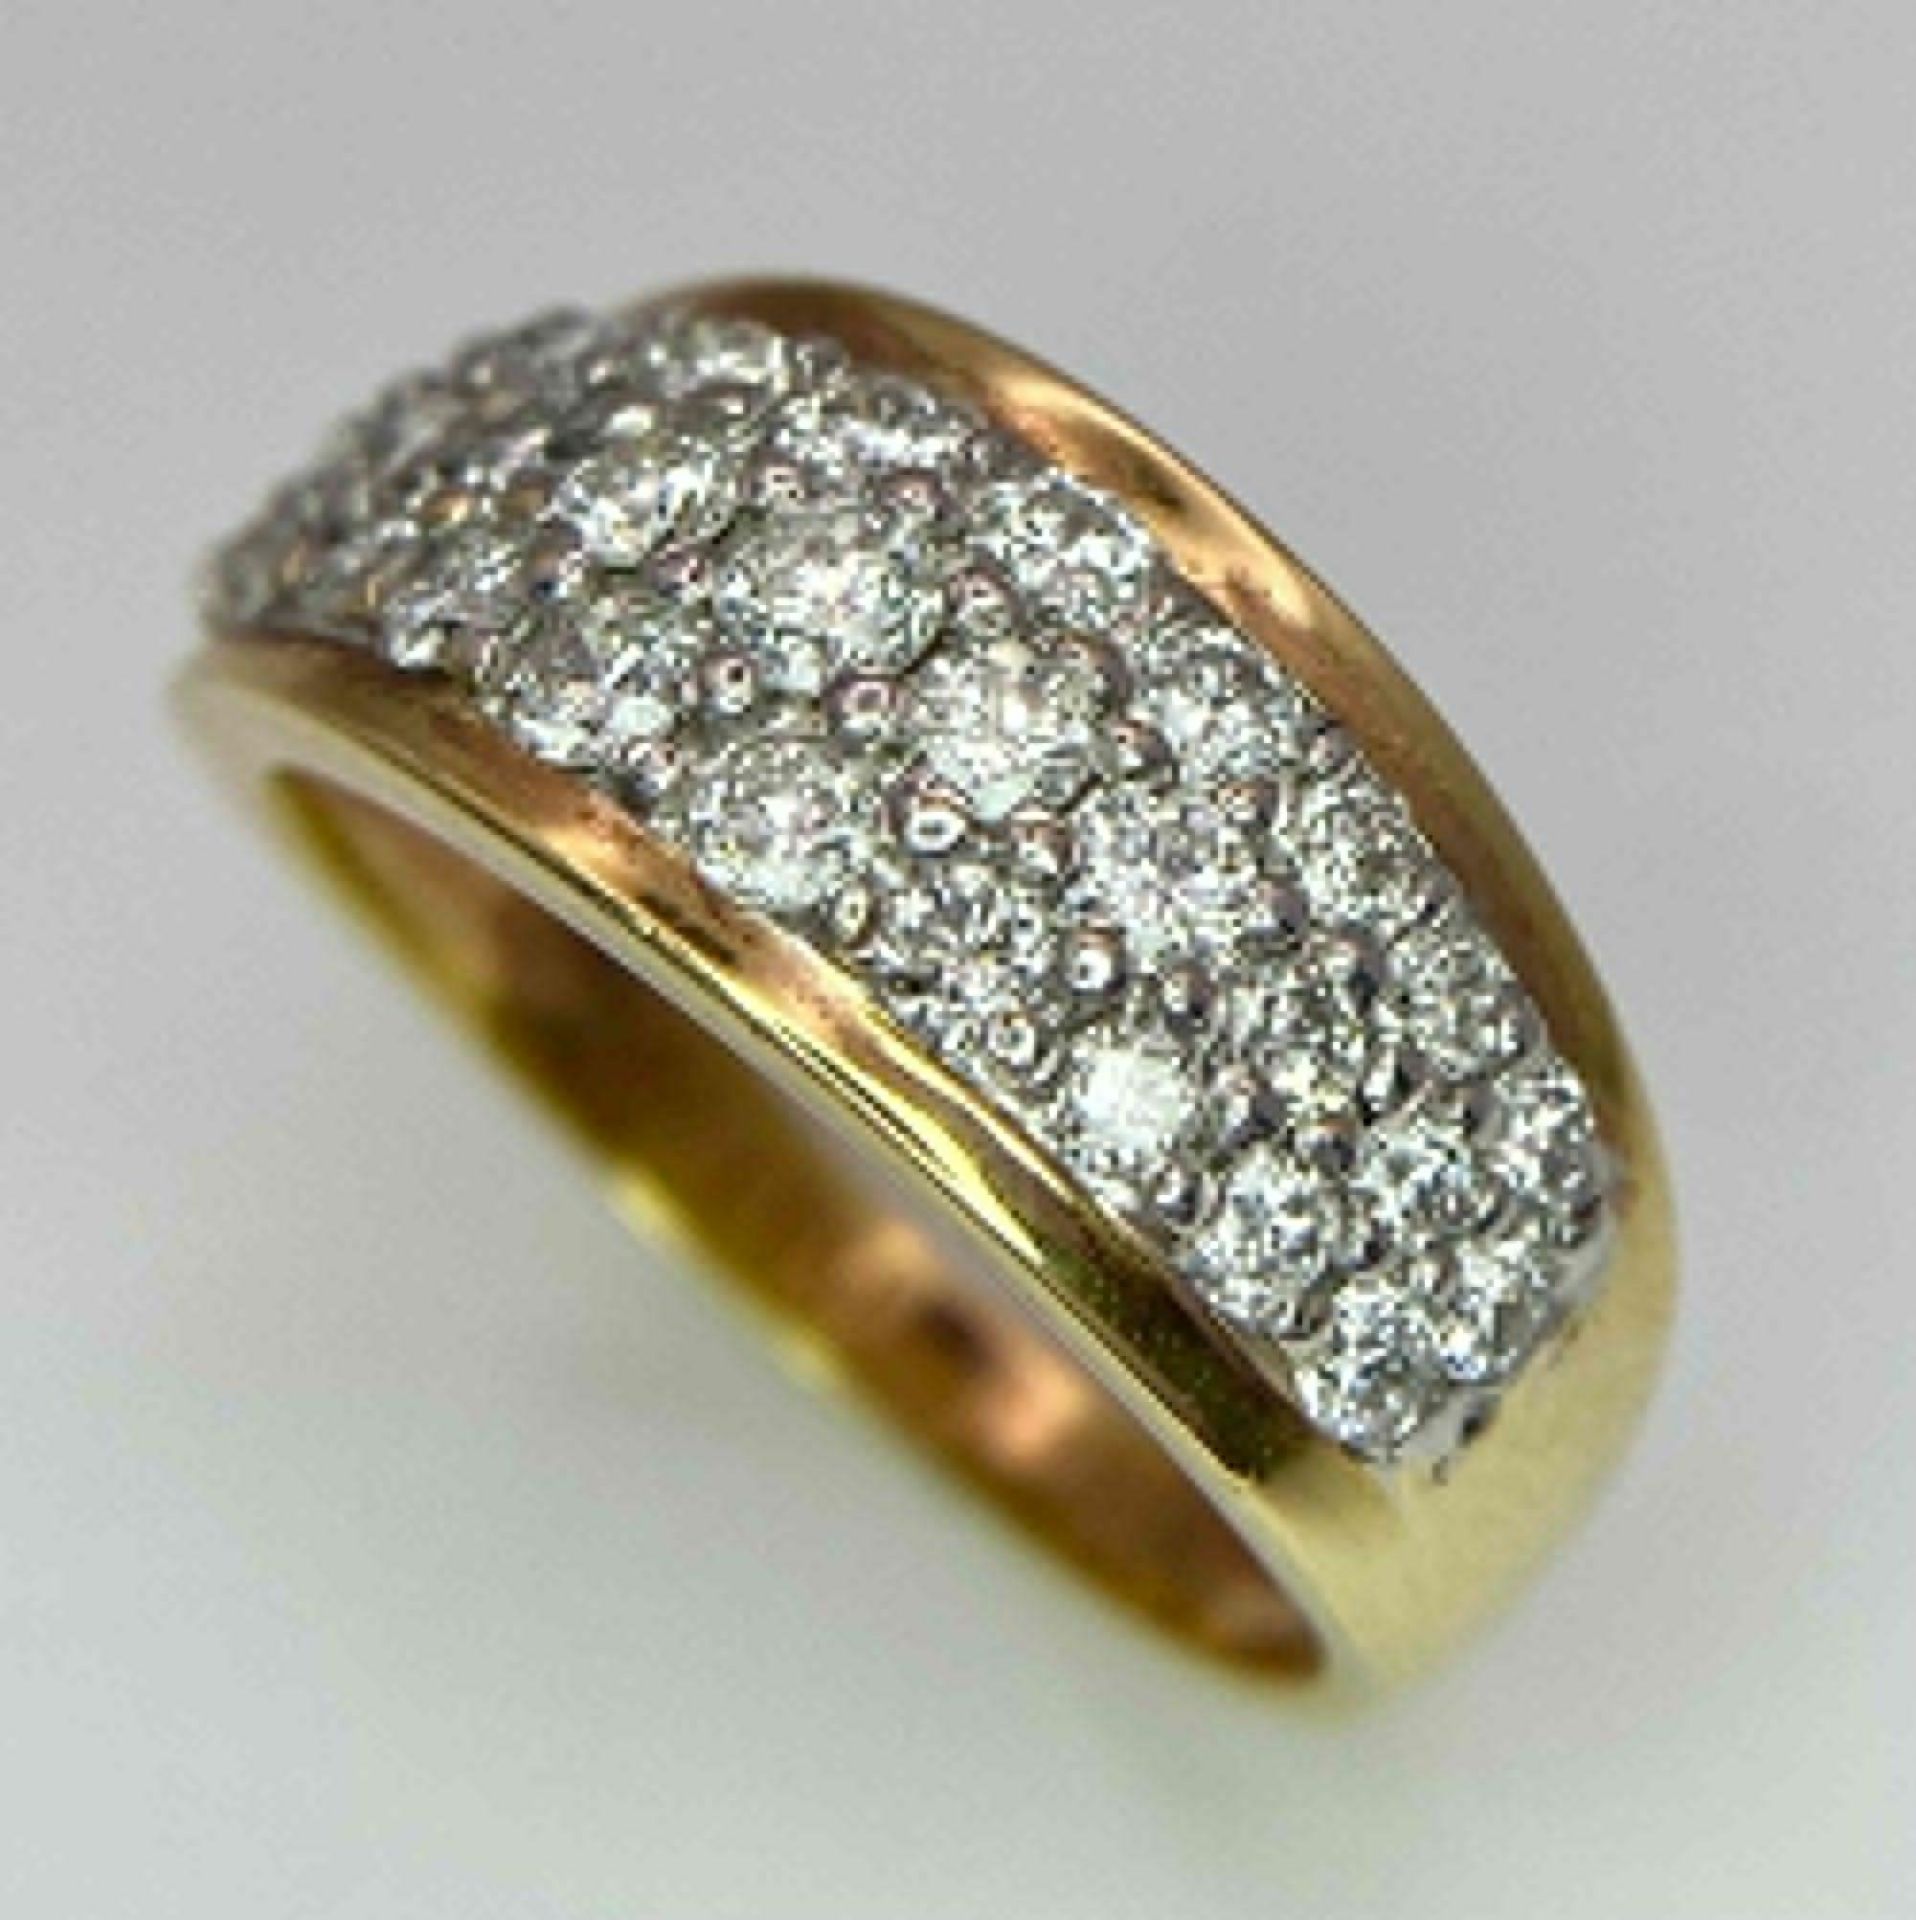 An 18K Yellow Gold Three-Row Cluster Ring. 1ctw. Size M. 5.5g total weight. - Image 4 of 15